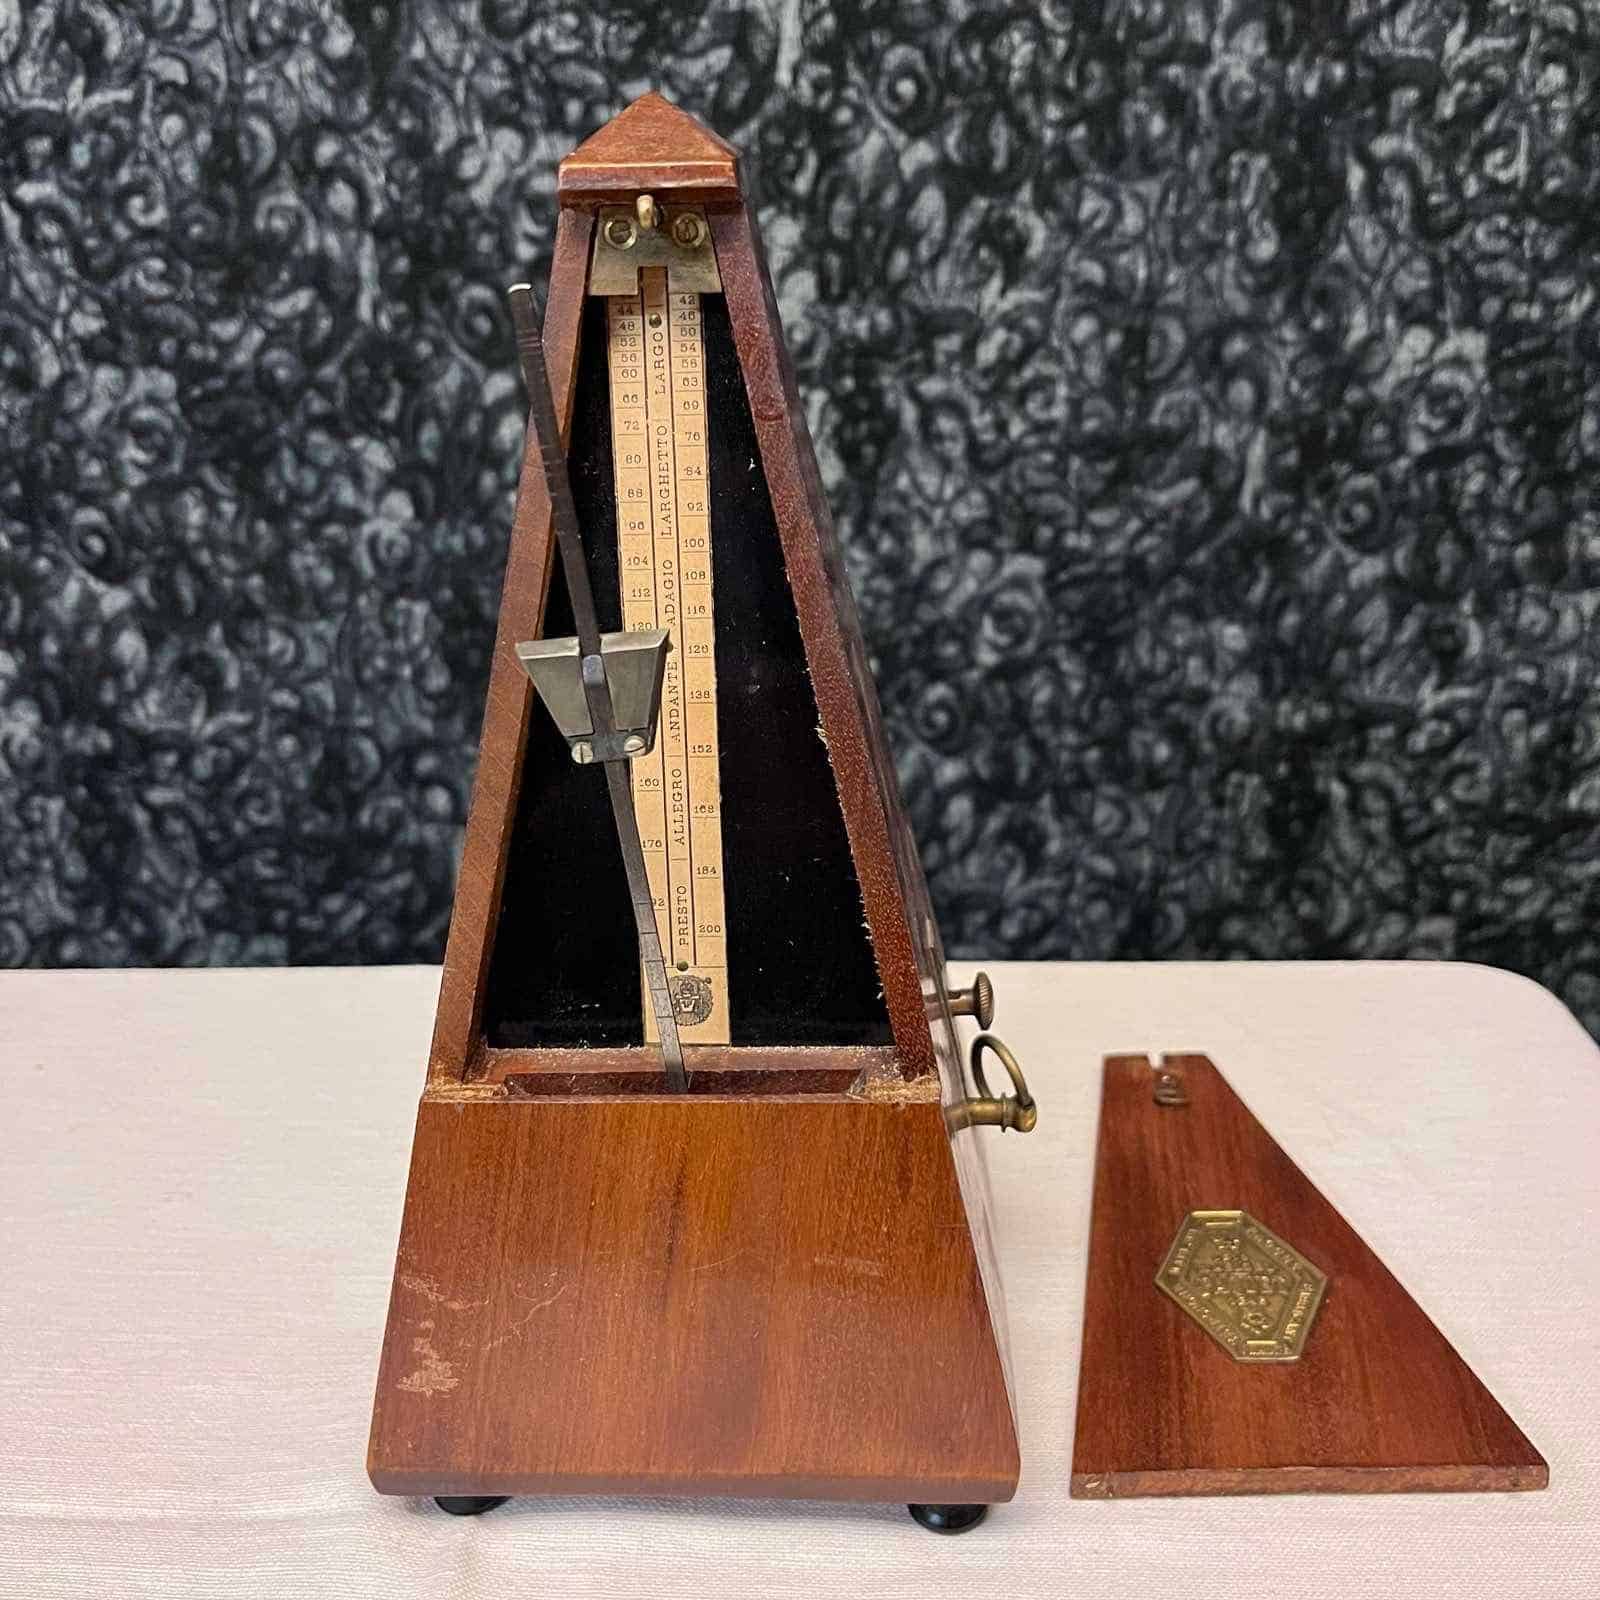 What the metronome really teaches classical musicians